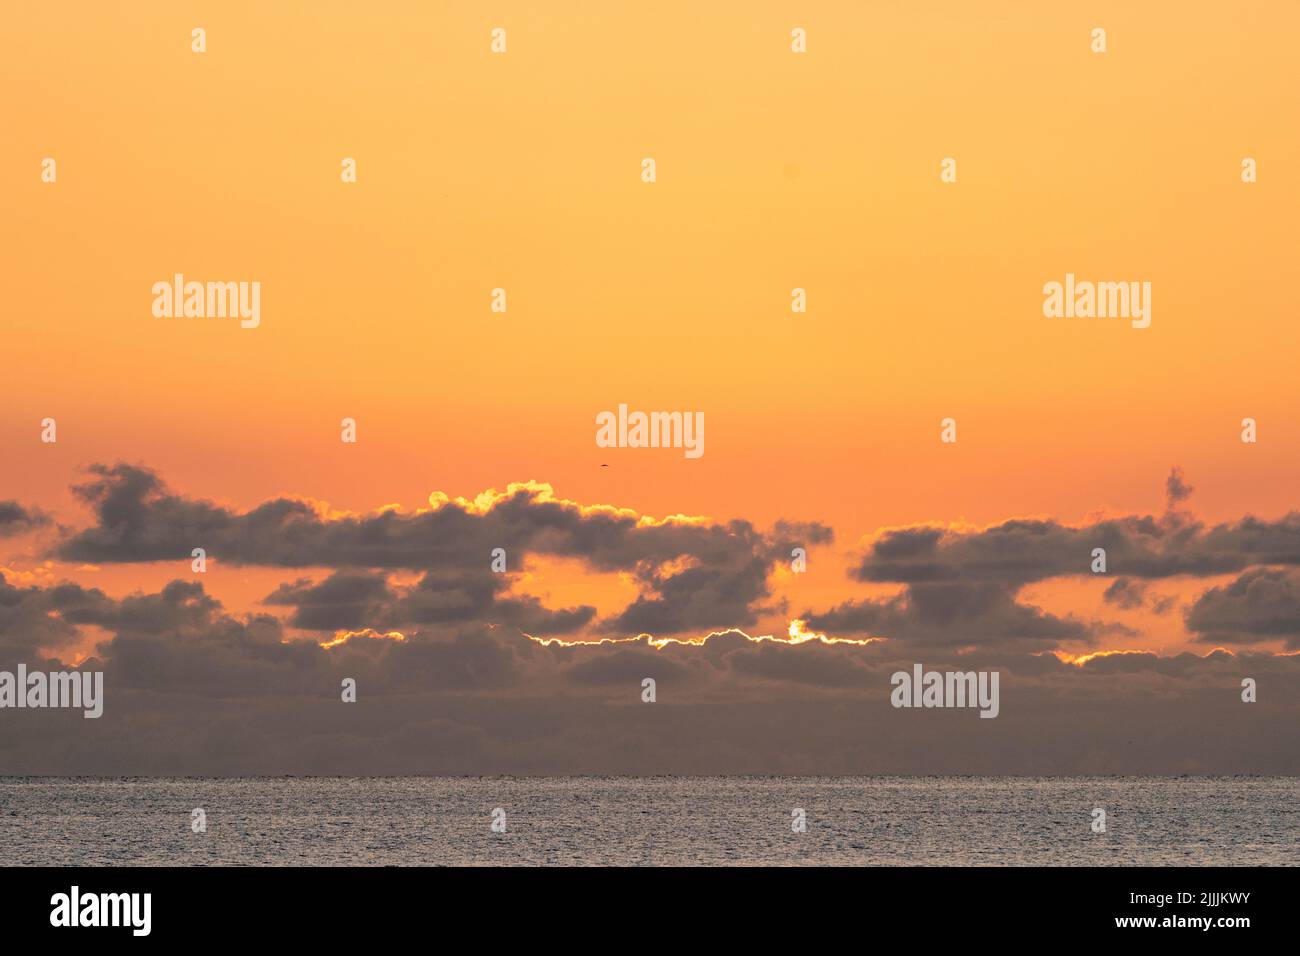 Herne Bay, Kent. 27/07/22. The dawn sky over the North Sea seen from the seafront at the resort town of Herne Bay. A mostly clear sky promising sunshine and warm temperatures for the day. Credit-Malcolm Fairman, Alamy Live News. Stock Photo